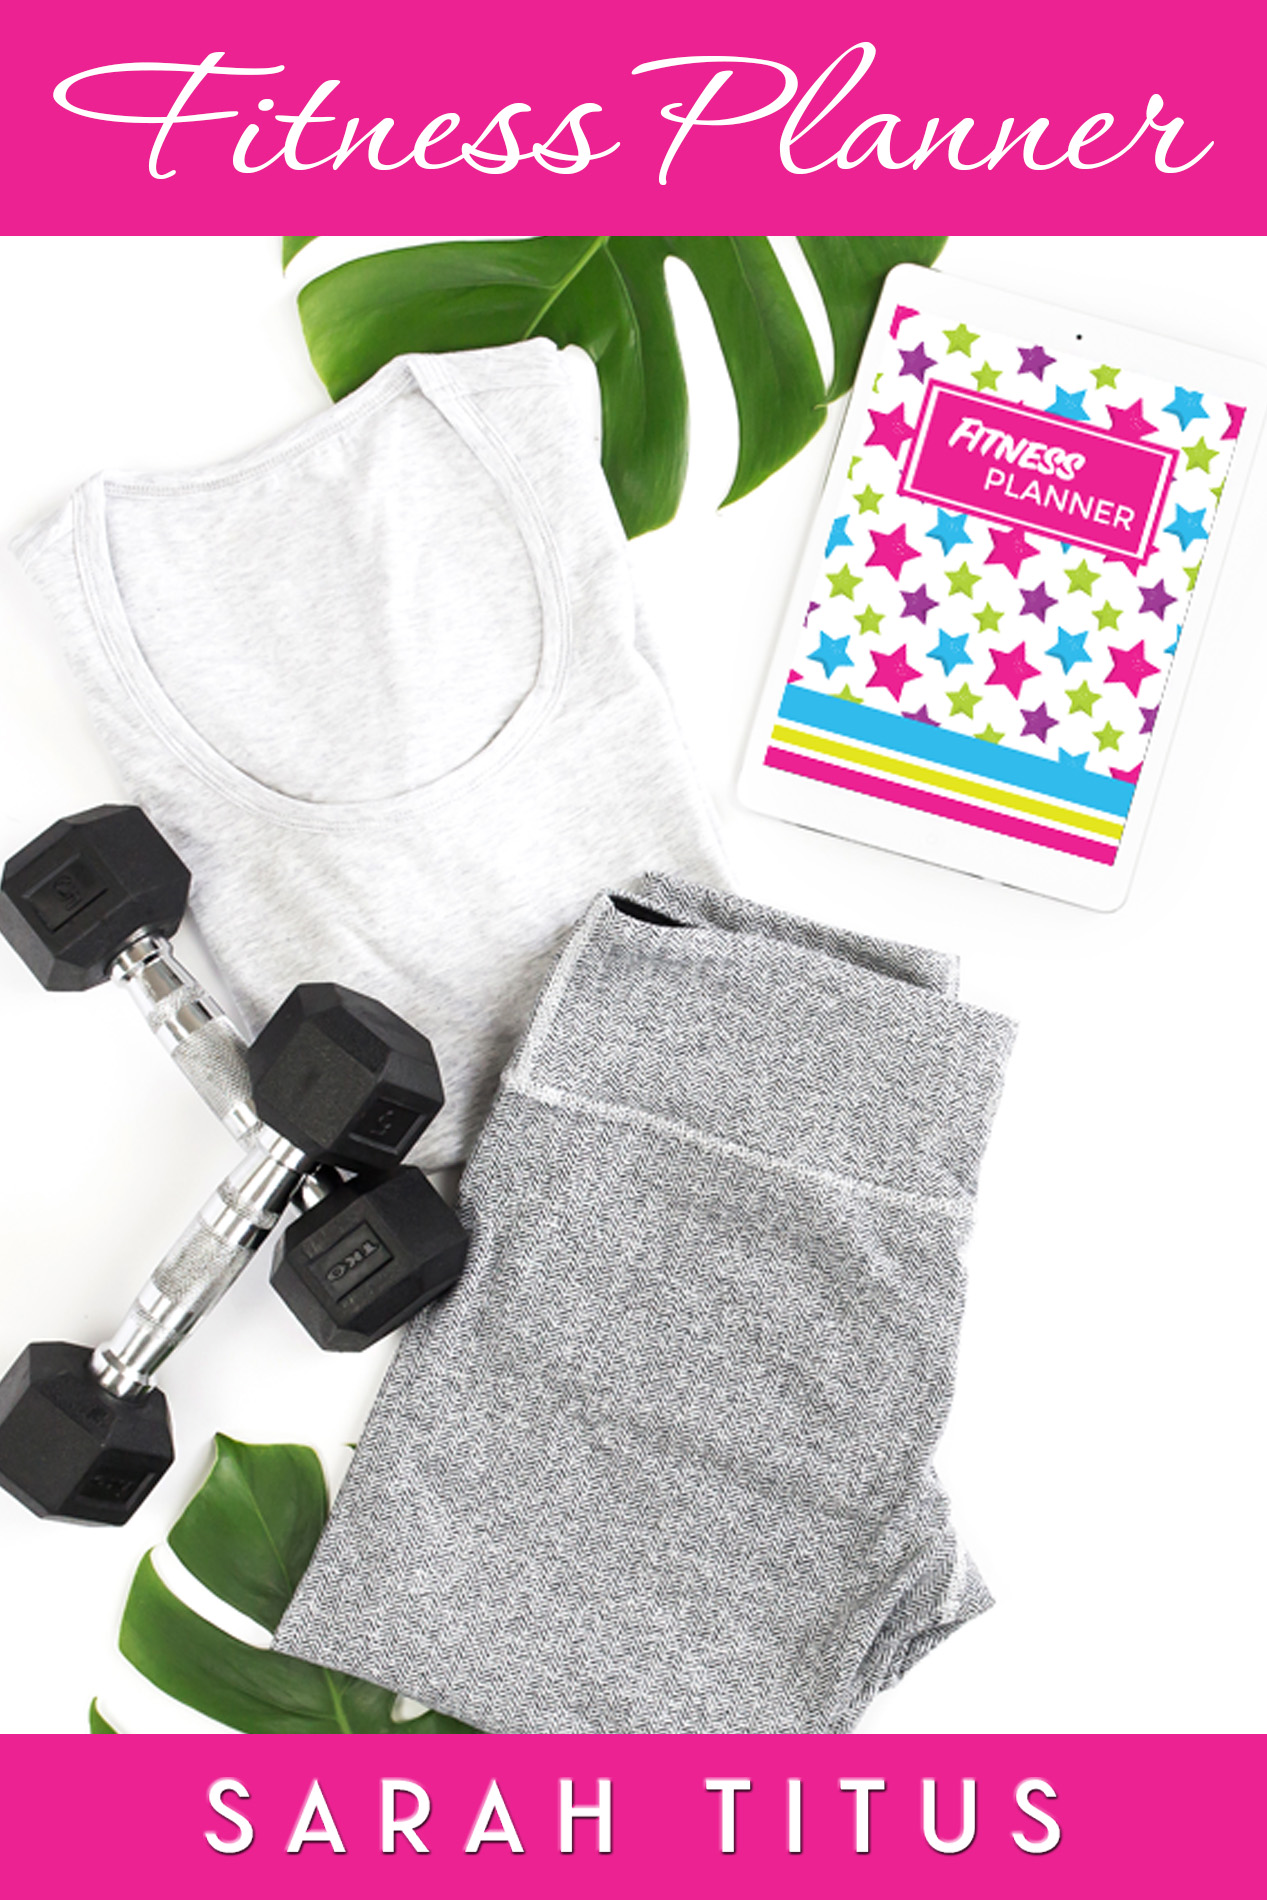 Whether you're just starting your exercise routine or been at it for years, this fitness planner free printables set will help you get in shape and organize your fitness plan. #fitnessplan #loseweight #fitness #fitnessbinder #fitnessplanner #binder #planner